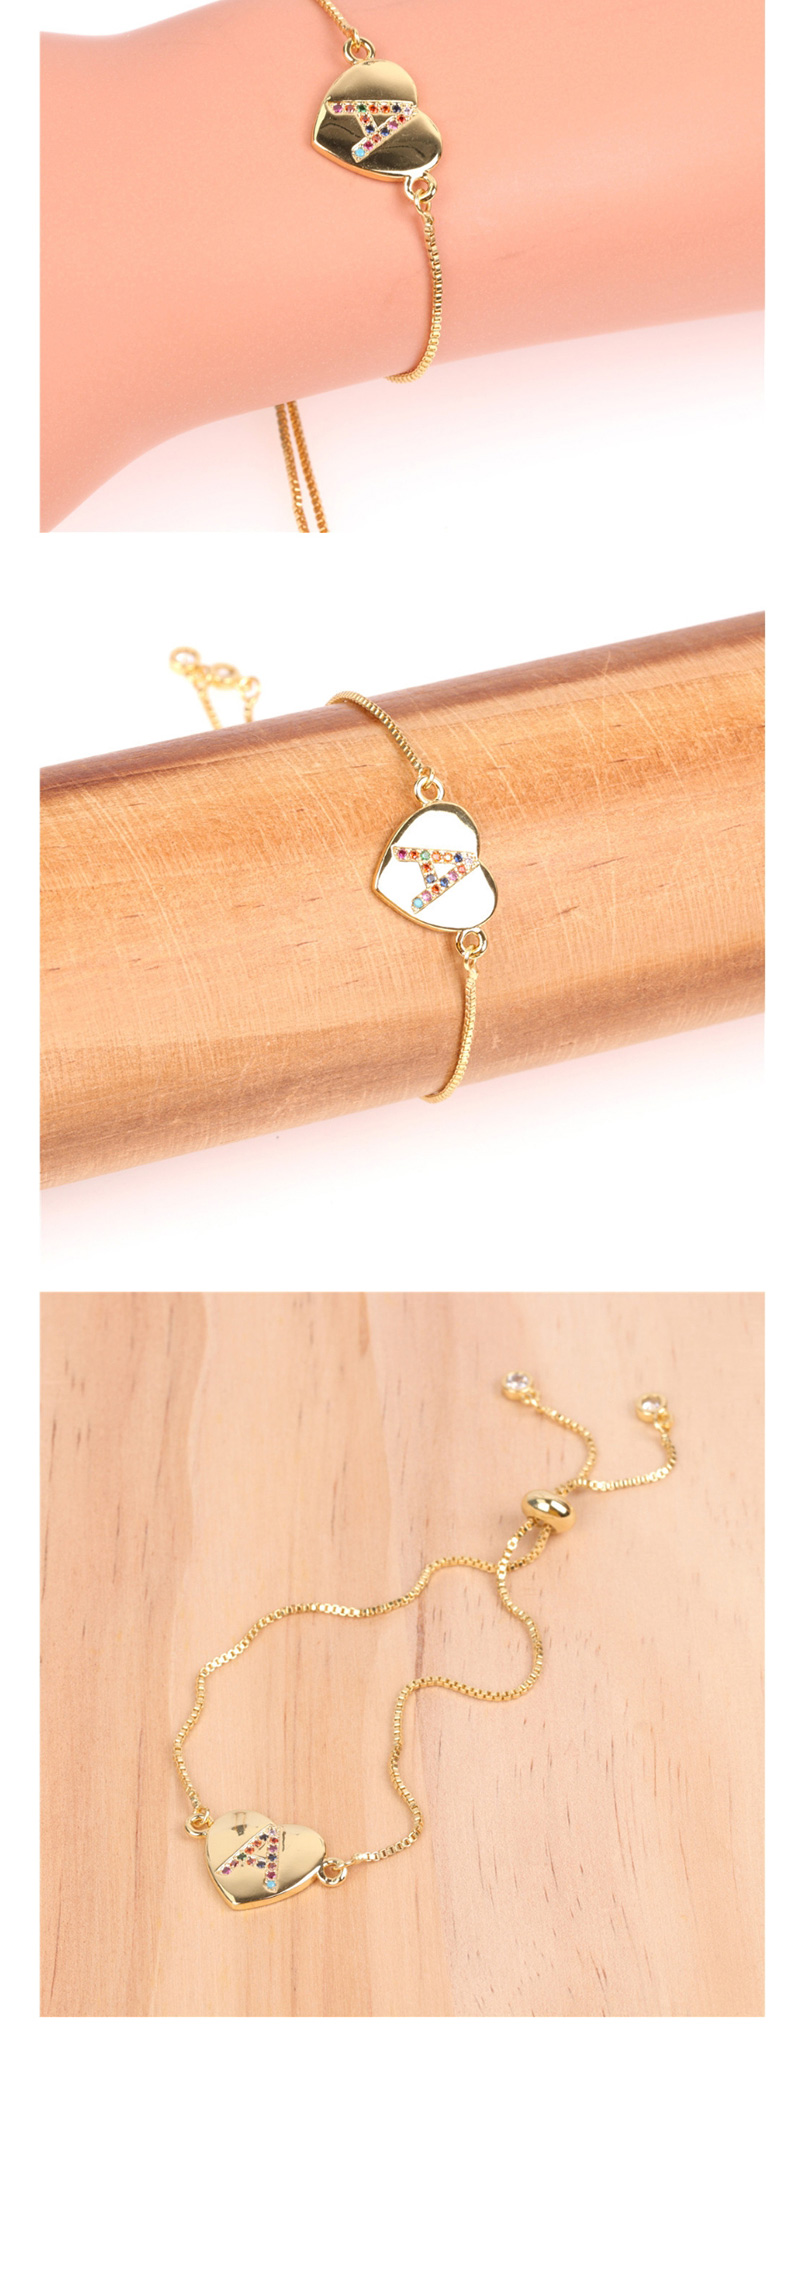 Fashion N Gold Heart Bracelet With Diamonds And Letters,Bracelets